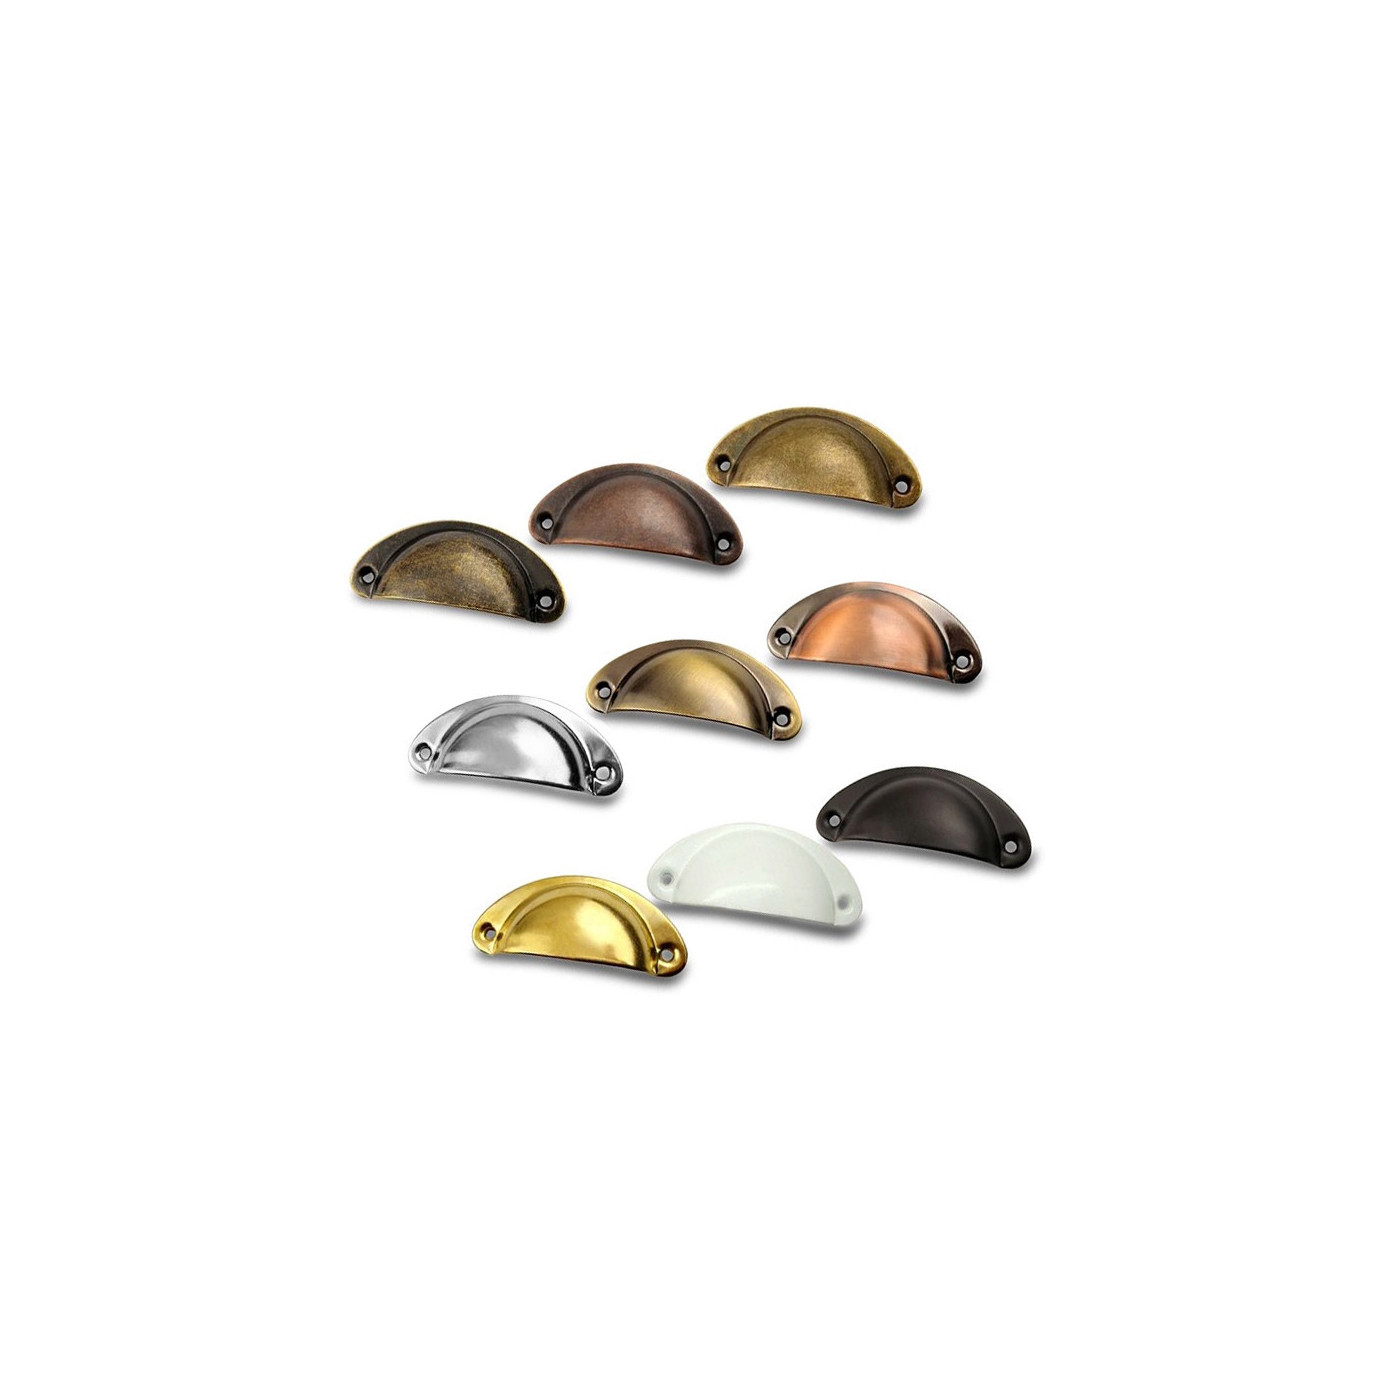 Set of 10 shell shaped handles for furniture: color 6  - 1